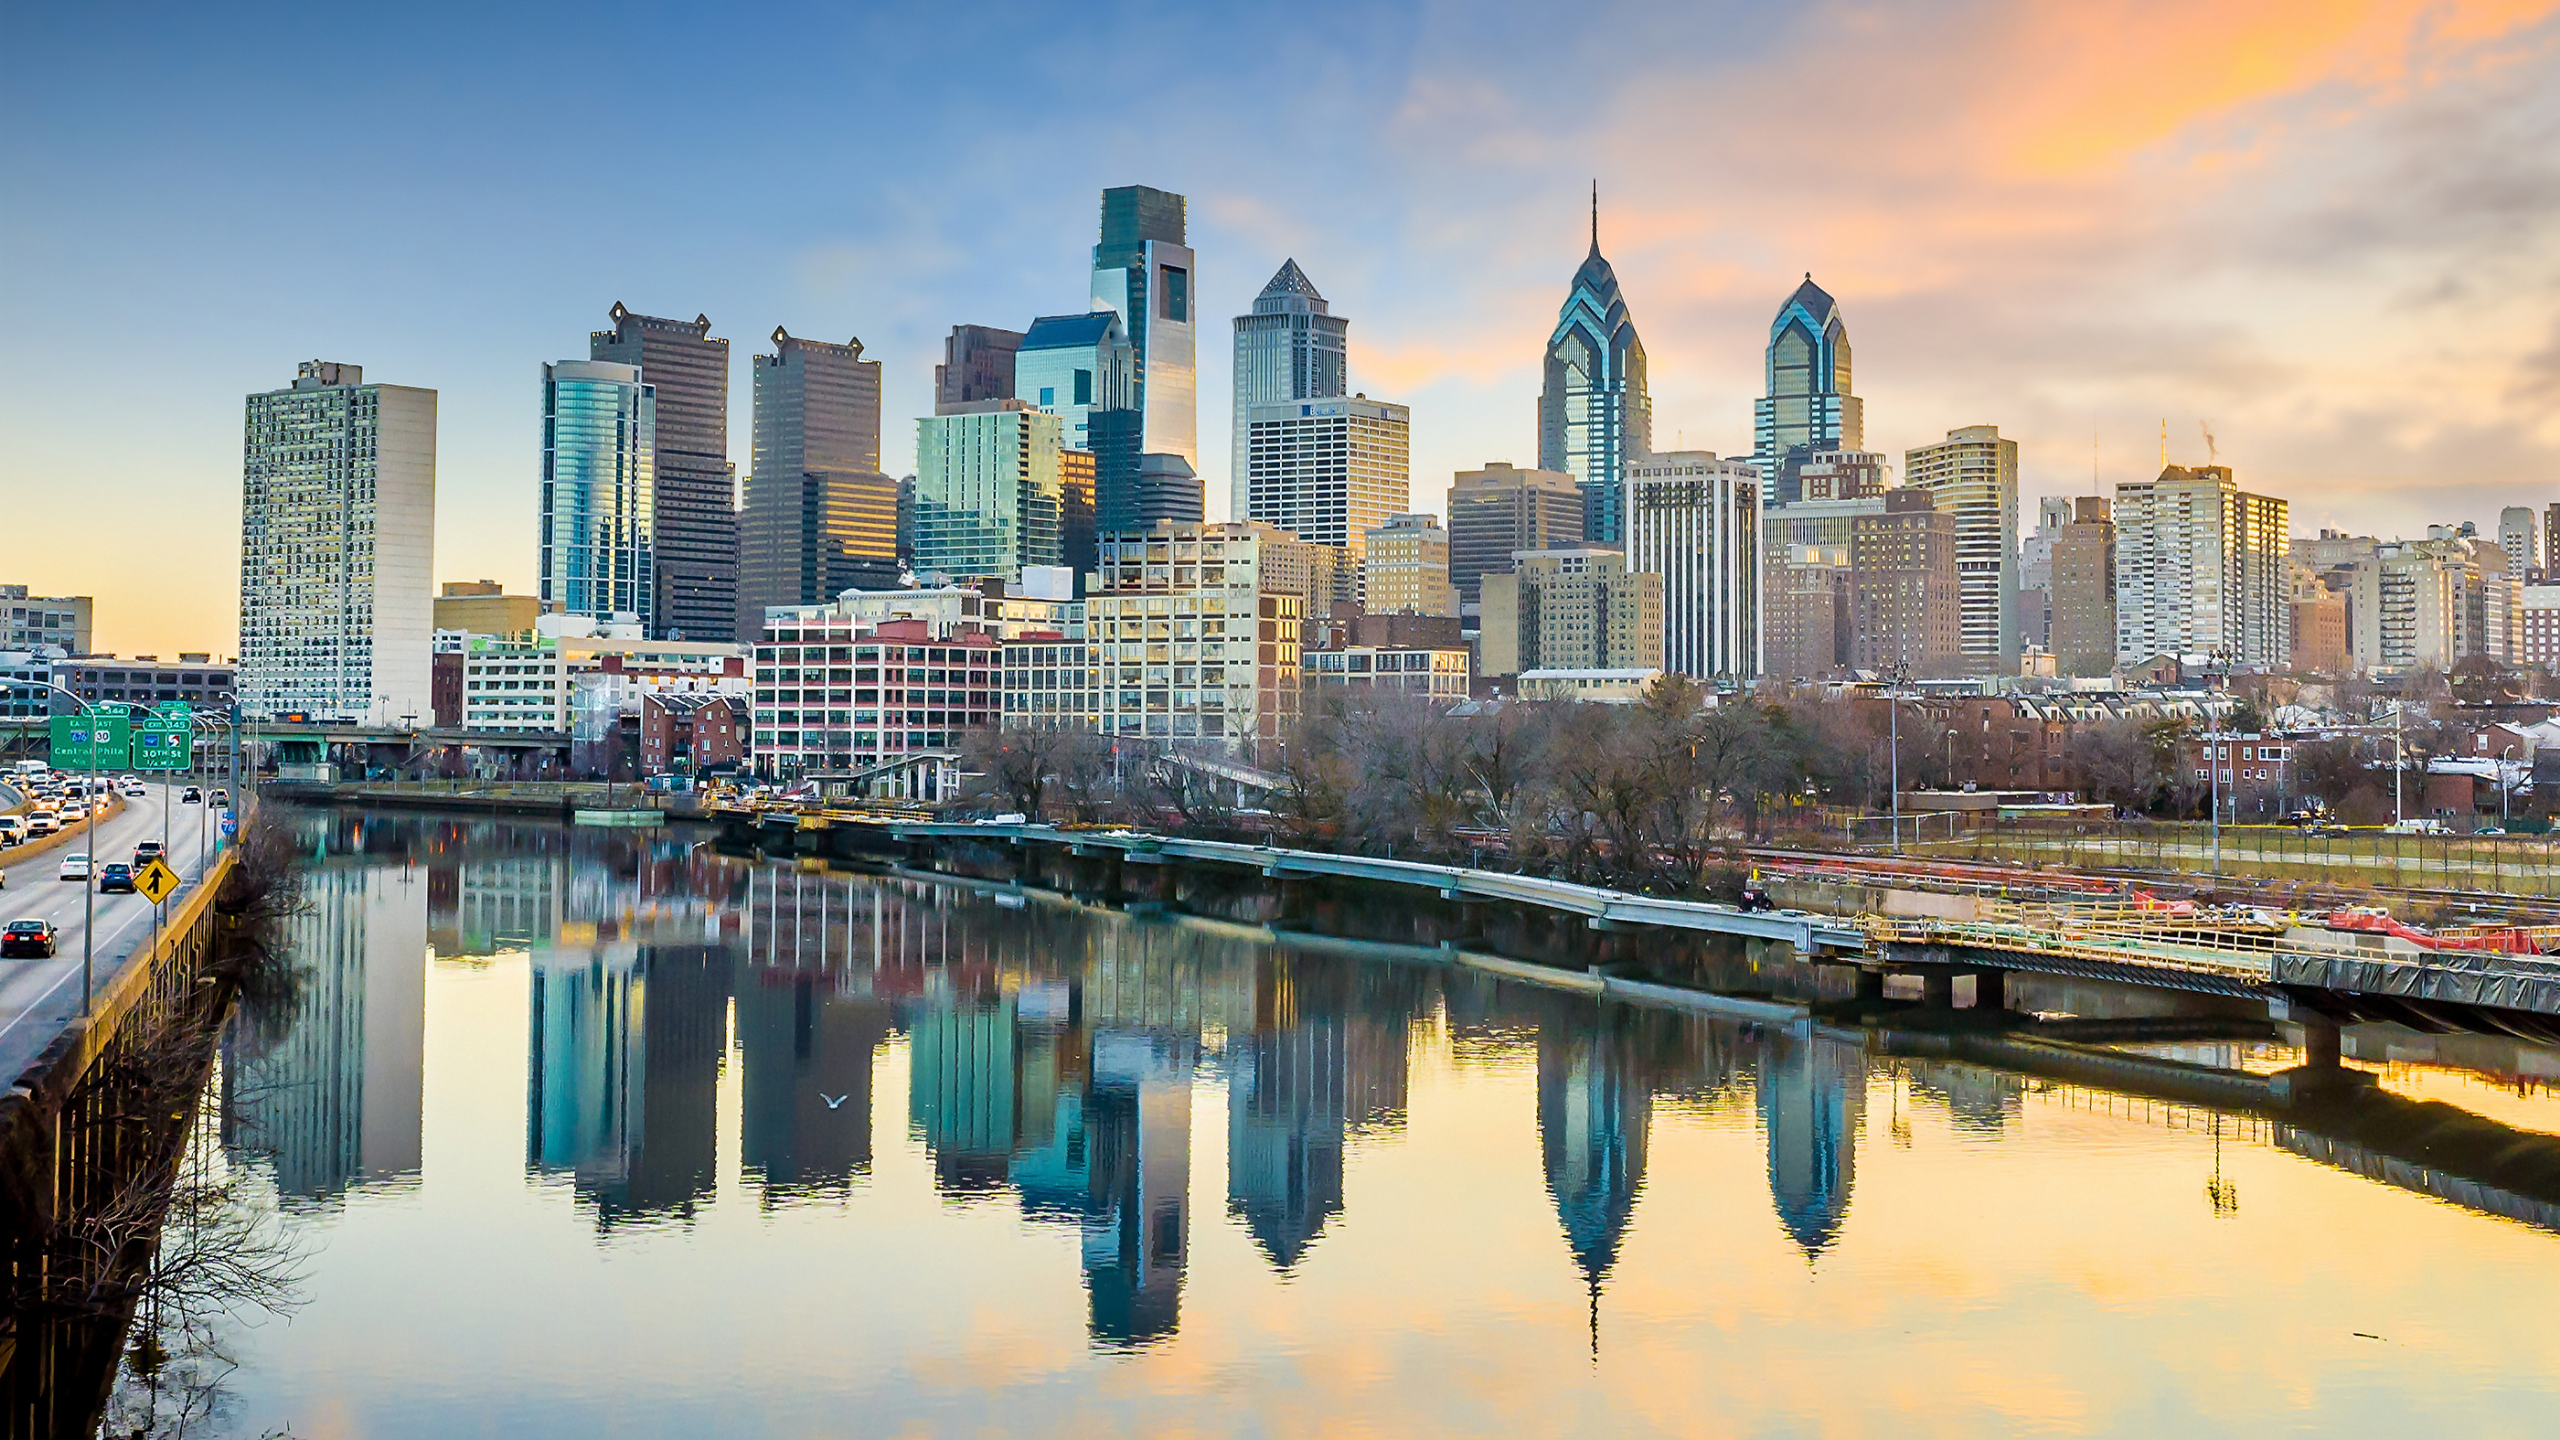 Philadelphia extends  COVID-19 restrictions to January 15